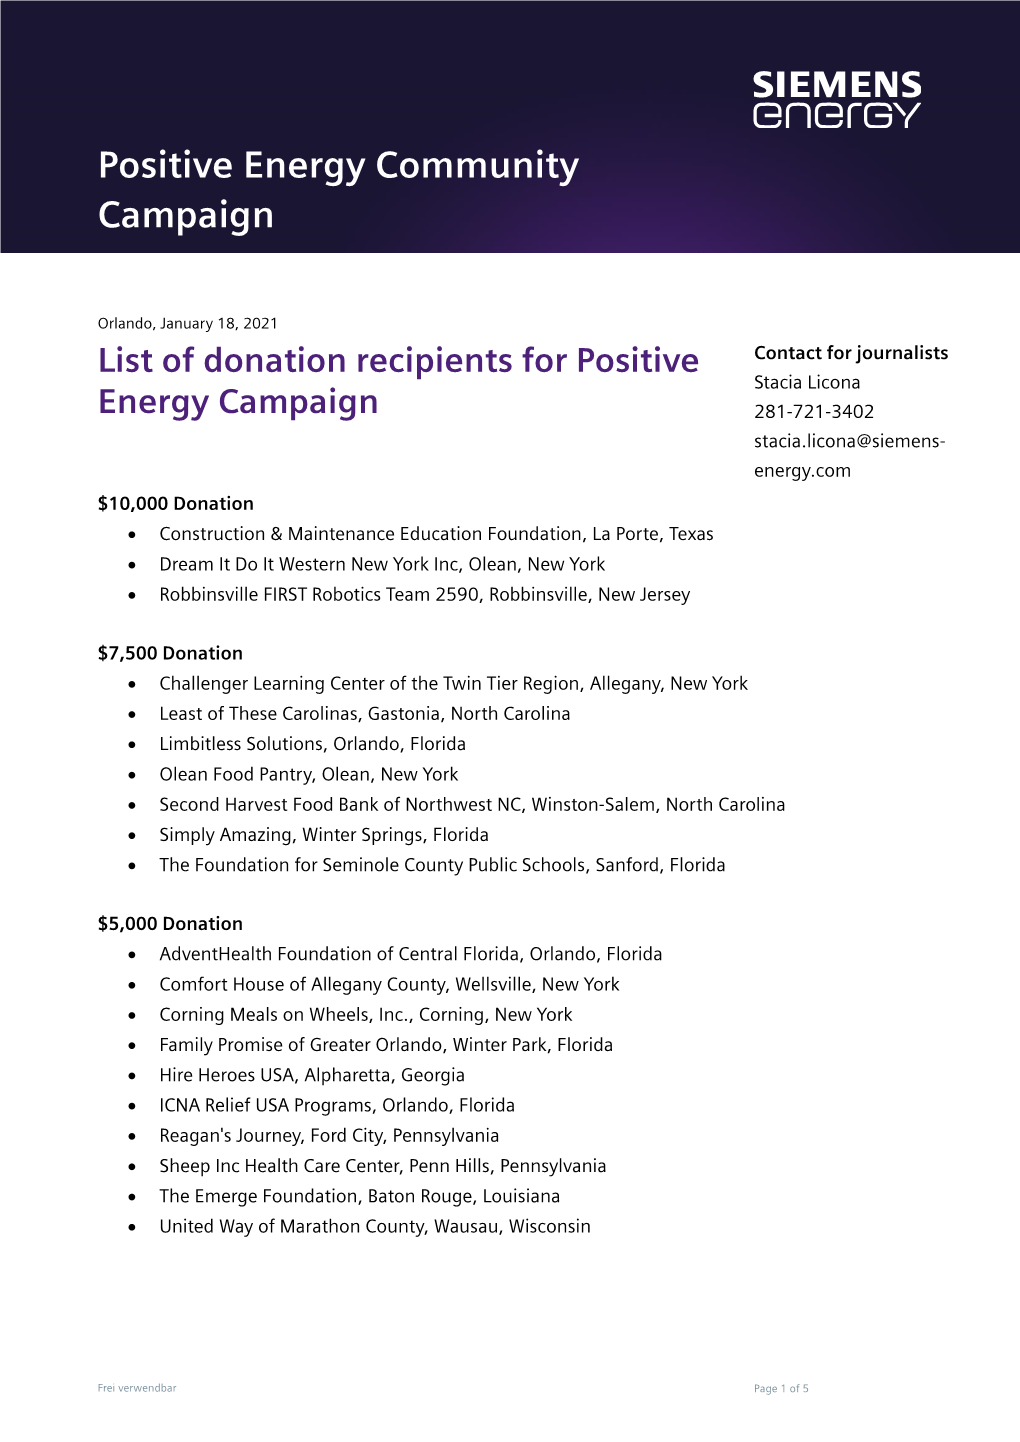 List of Donation Recipients for Positive Energy Campaign